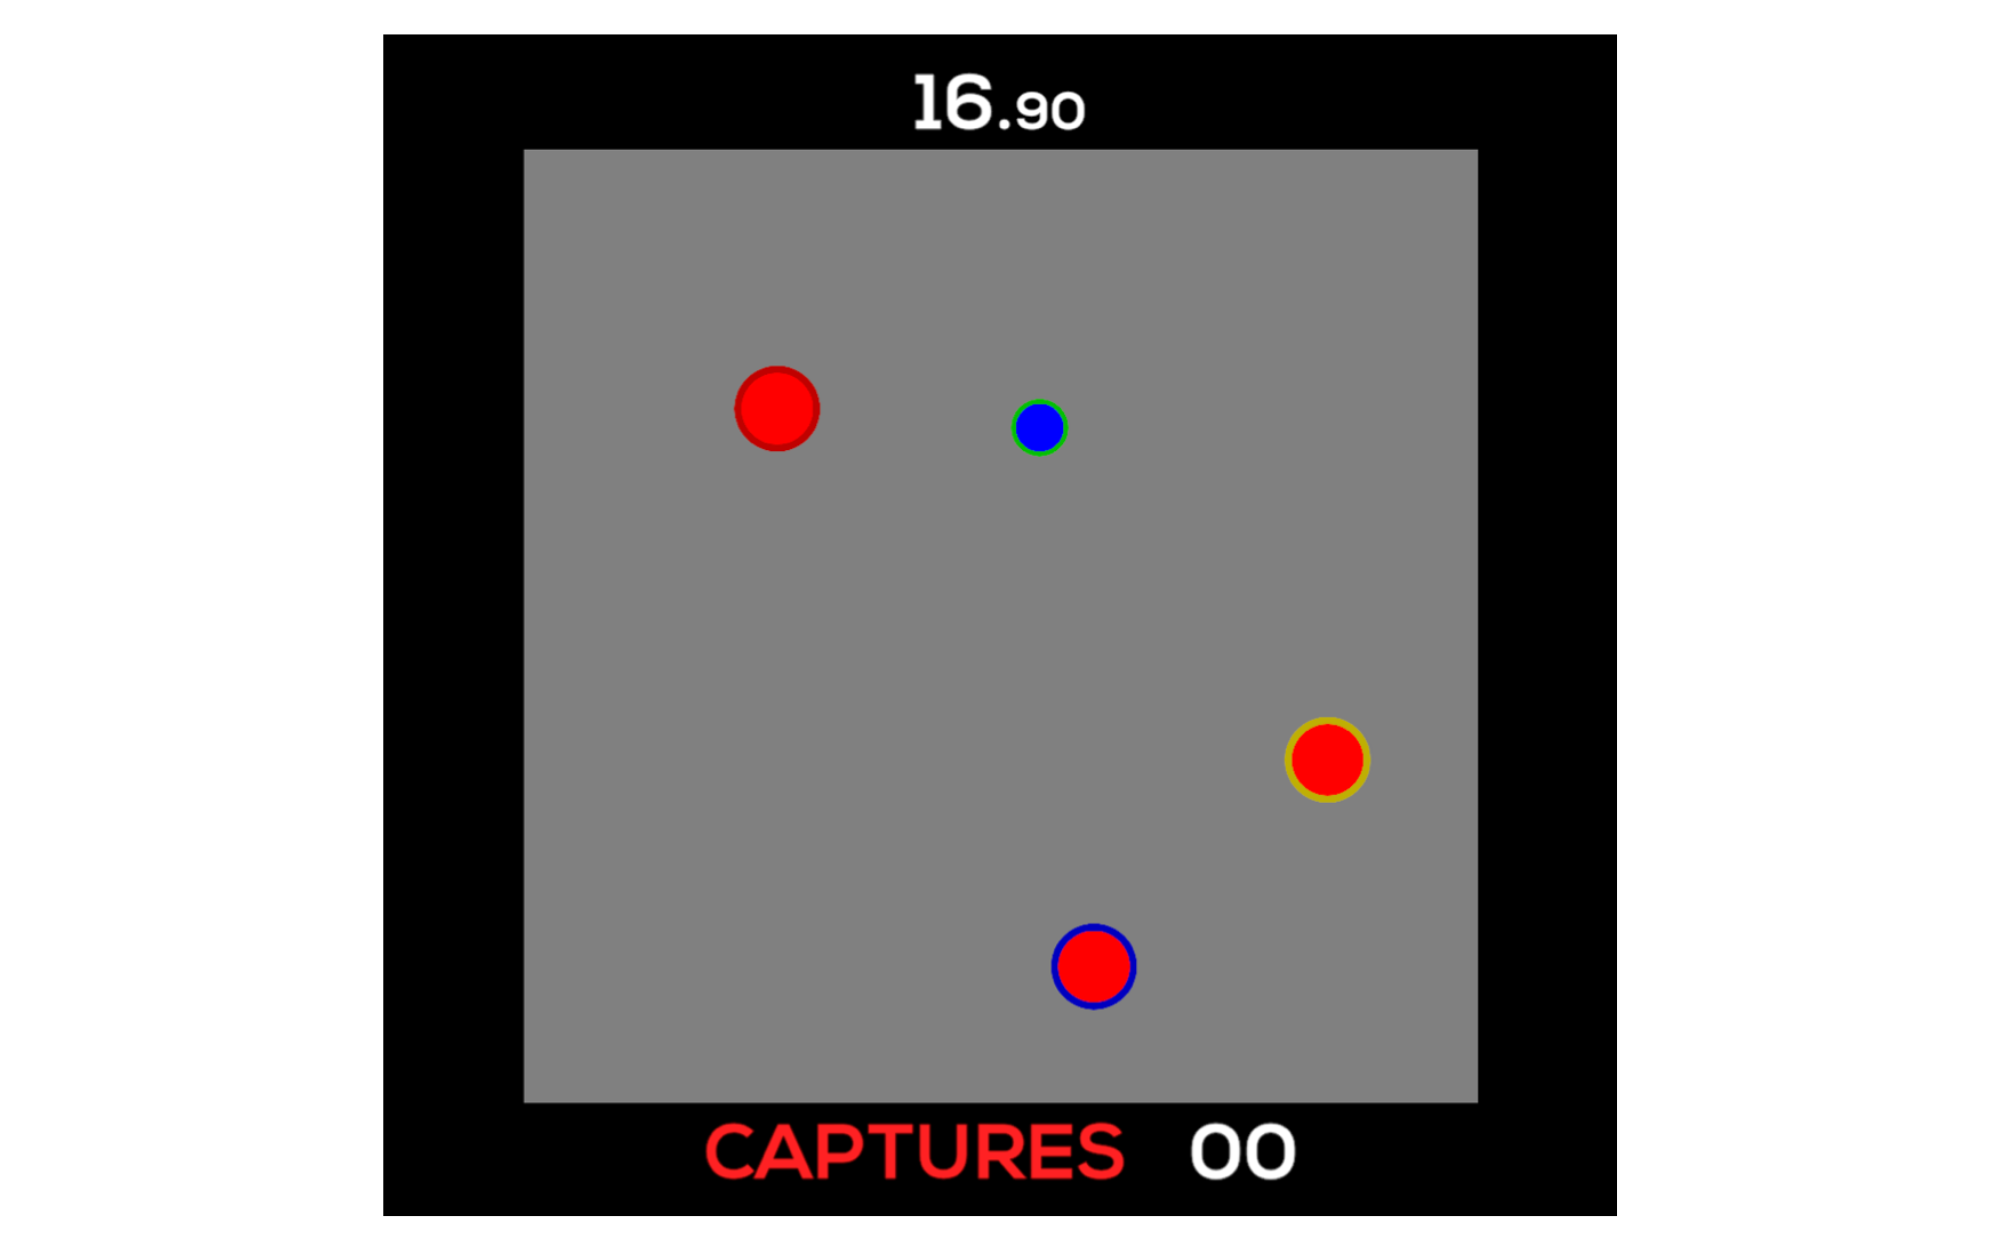 Our game interface consisting of a prey (blue) and predators (red) used to measure complacency.